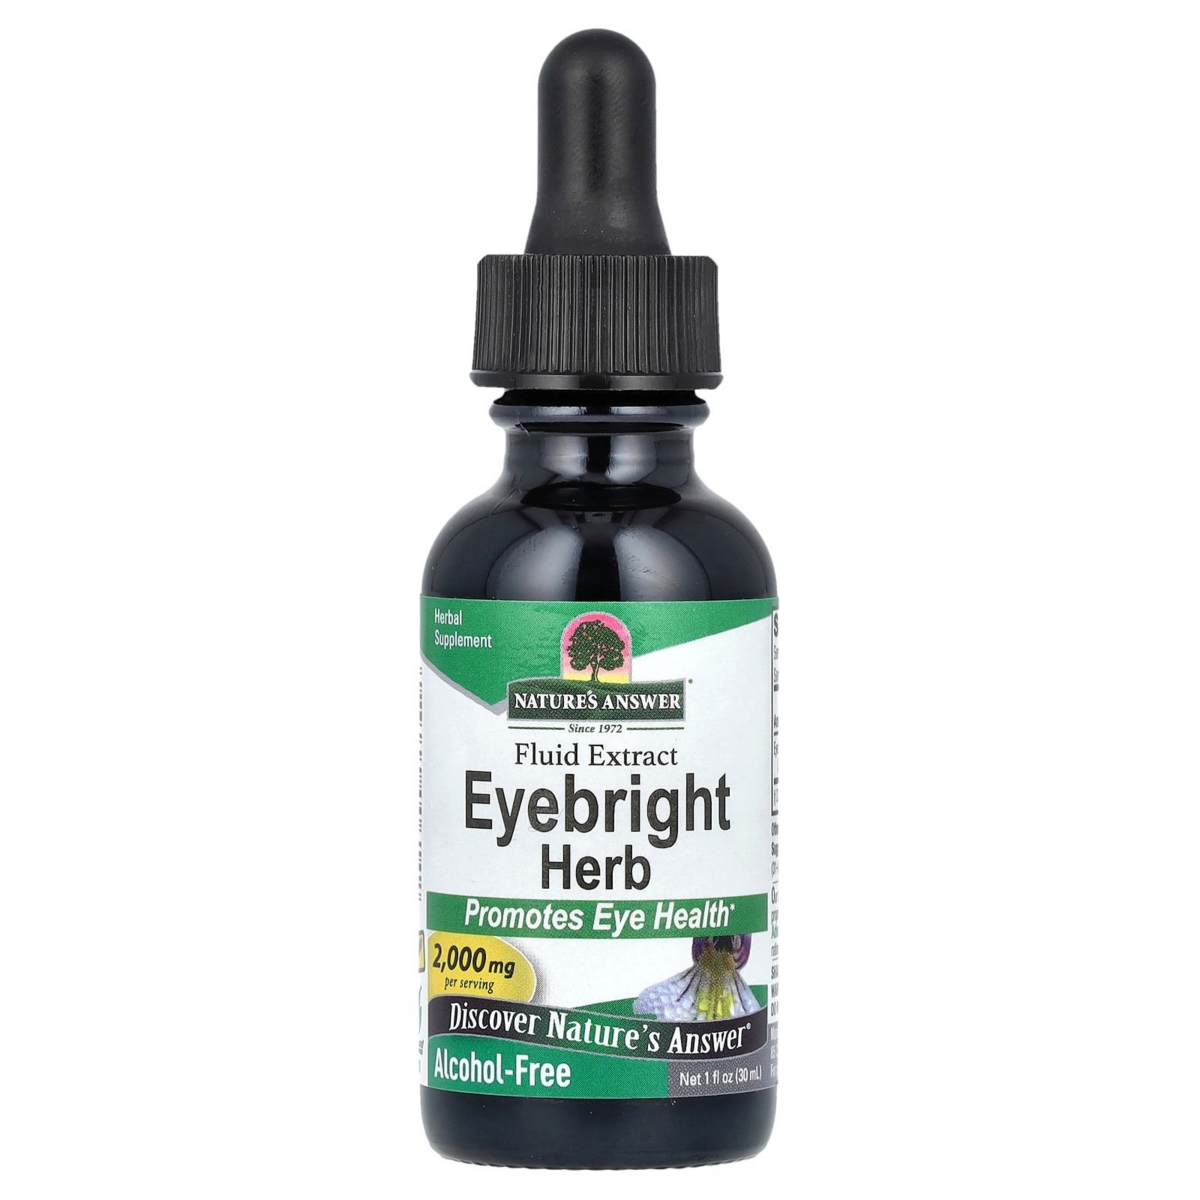 Eyebright Herb Fluid Extract Alcohol-Free 2 000 mg - 1 fl oz (30 ml) - Assorted Pre-Pack